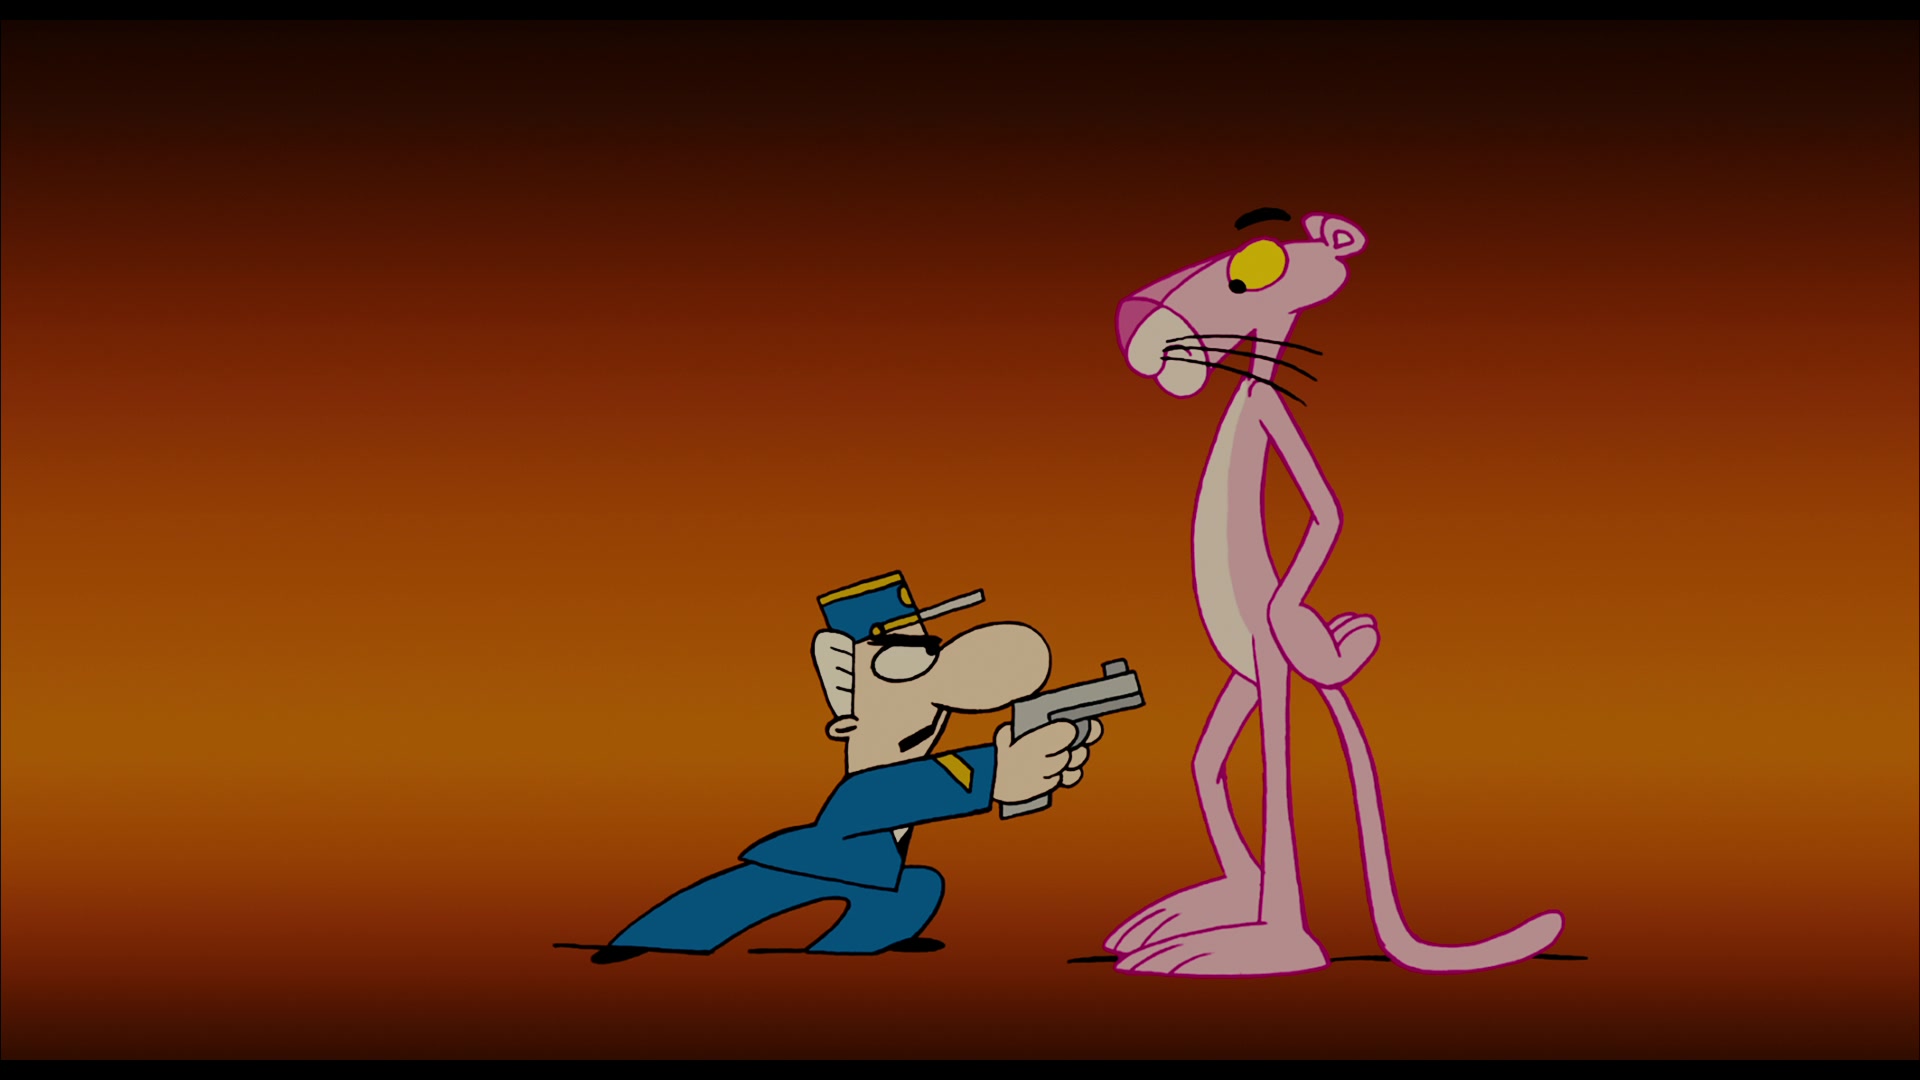 Inspector Clouseau finally has The Pink Panther in his sights in The Pink Panther (2006), MGM